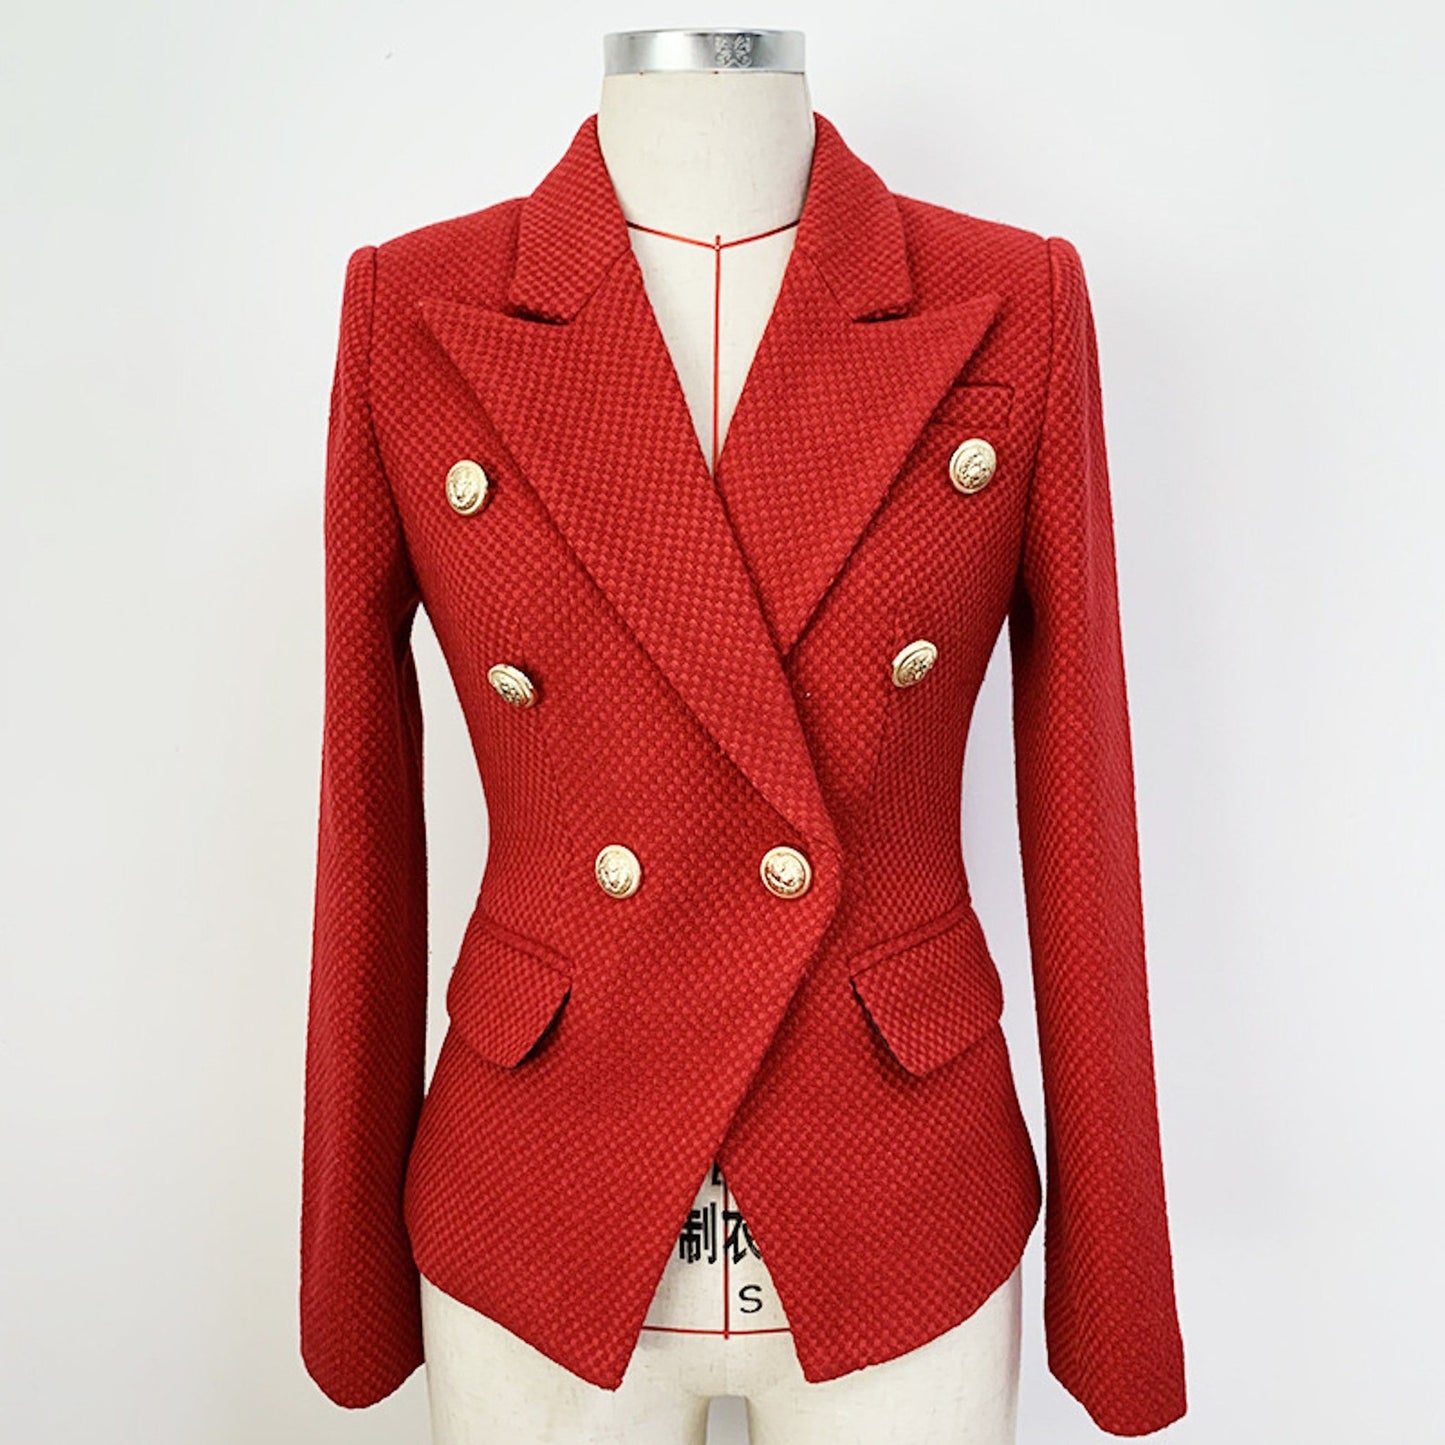 Women's Tweed Fitted Blaze Coat Christmas Red  UK CUSTOMER SERVICE! Women's Tweed Fitted Blaze Coat Christmas Red, fitted perfect and sharply tailored. Can worn for interview, ceremony, college inauguration, events and outside. Dry cleaning. Fully lined. Whether you're wearing one with a shirt or dress, we've got blazers for women who wanna bring a new kind a energy to their outfits. Add some classic tailoring to your wardrobe for day-to-night dressing with a blazer.